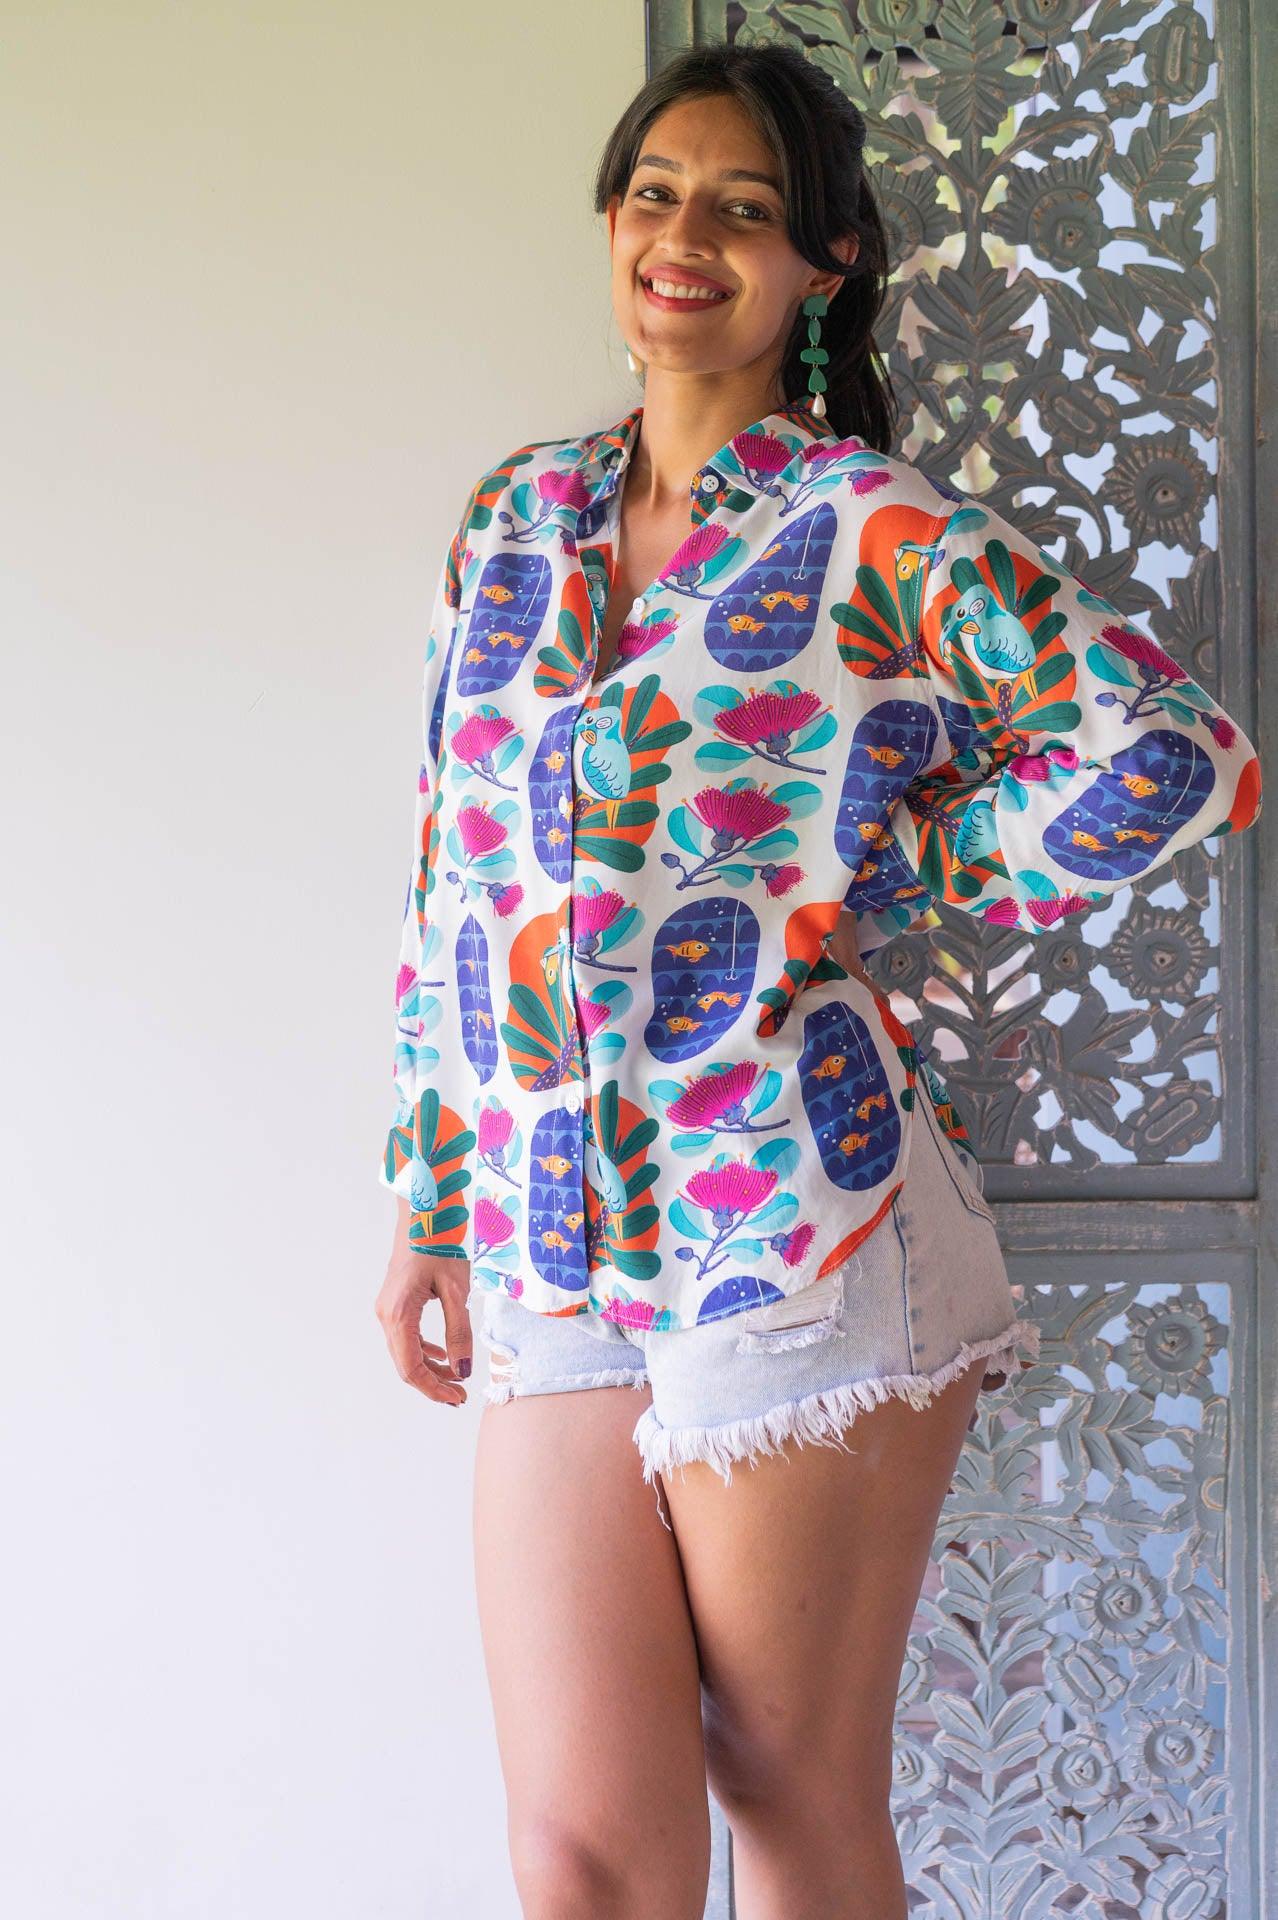 Quirky and vibrant Goa resortwear shirt by Siesta o'Clock